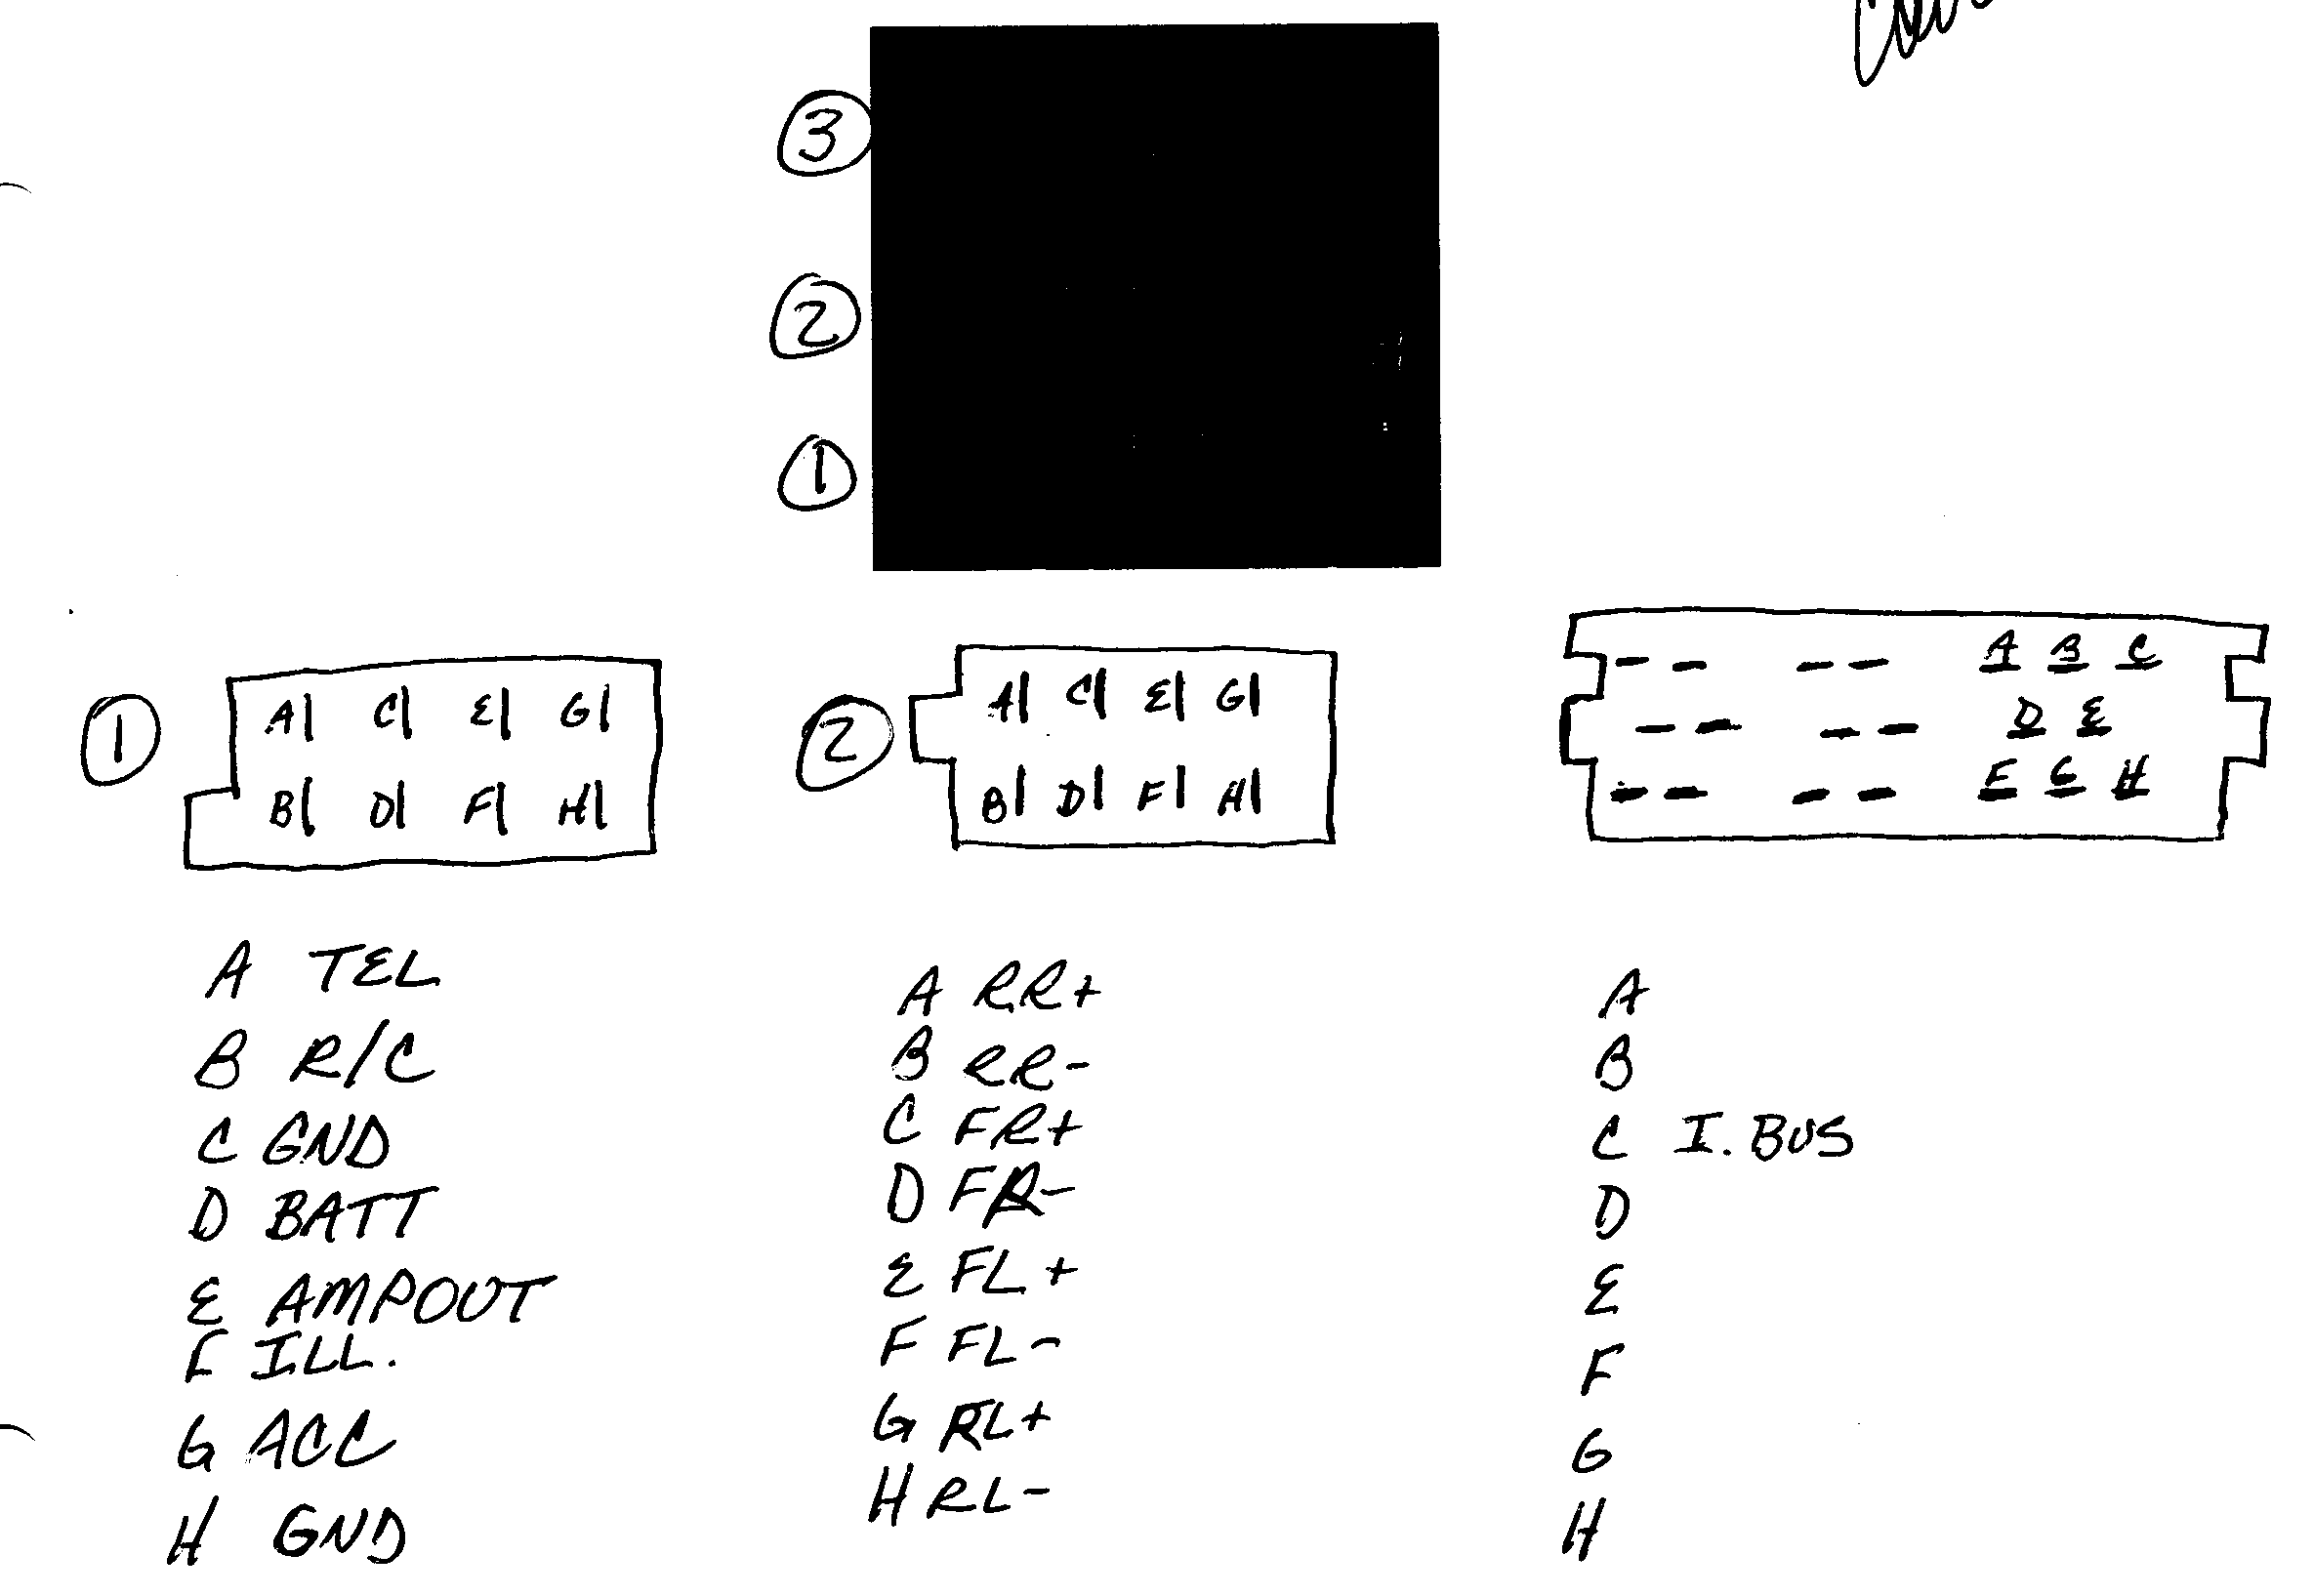 Land Rover Discovery Fuse Box Diagram